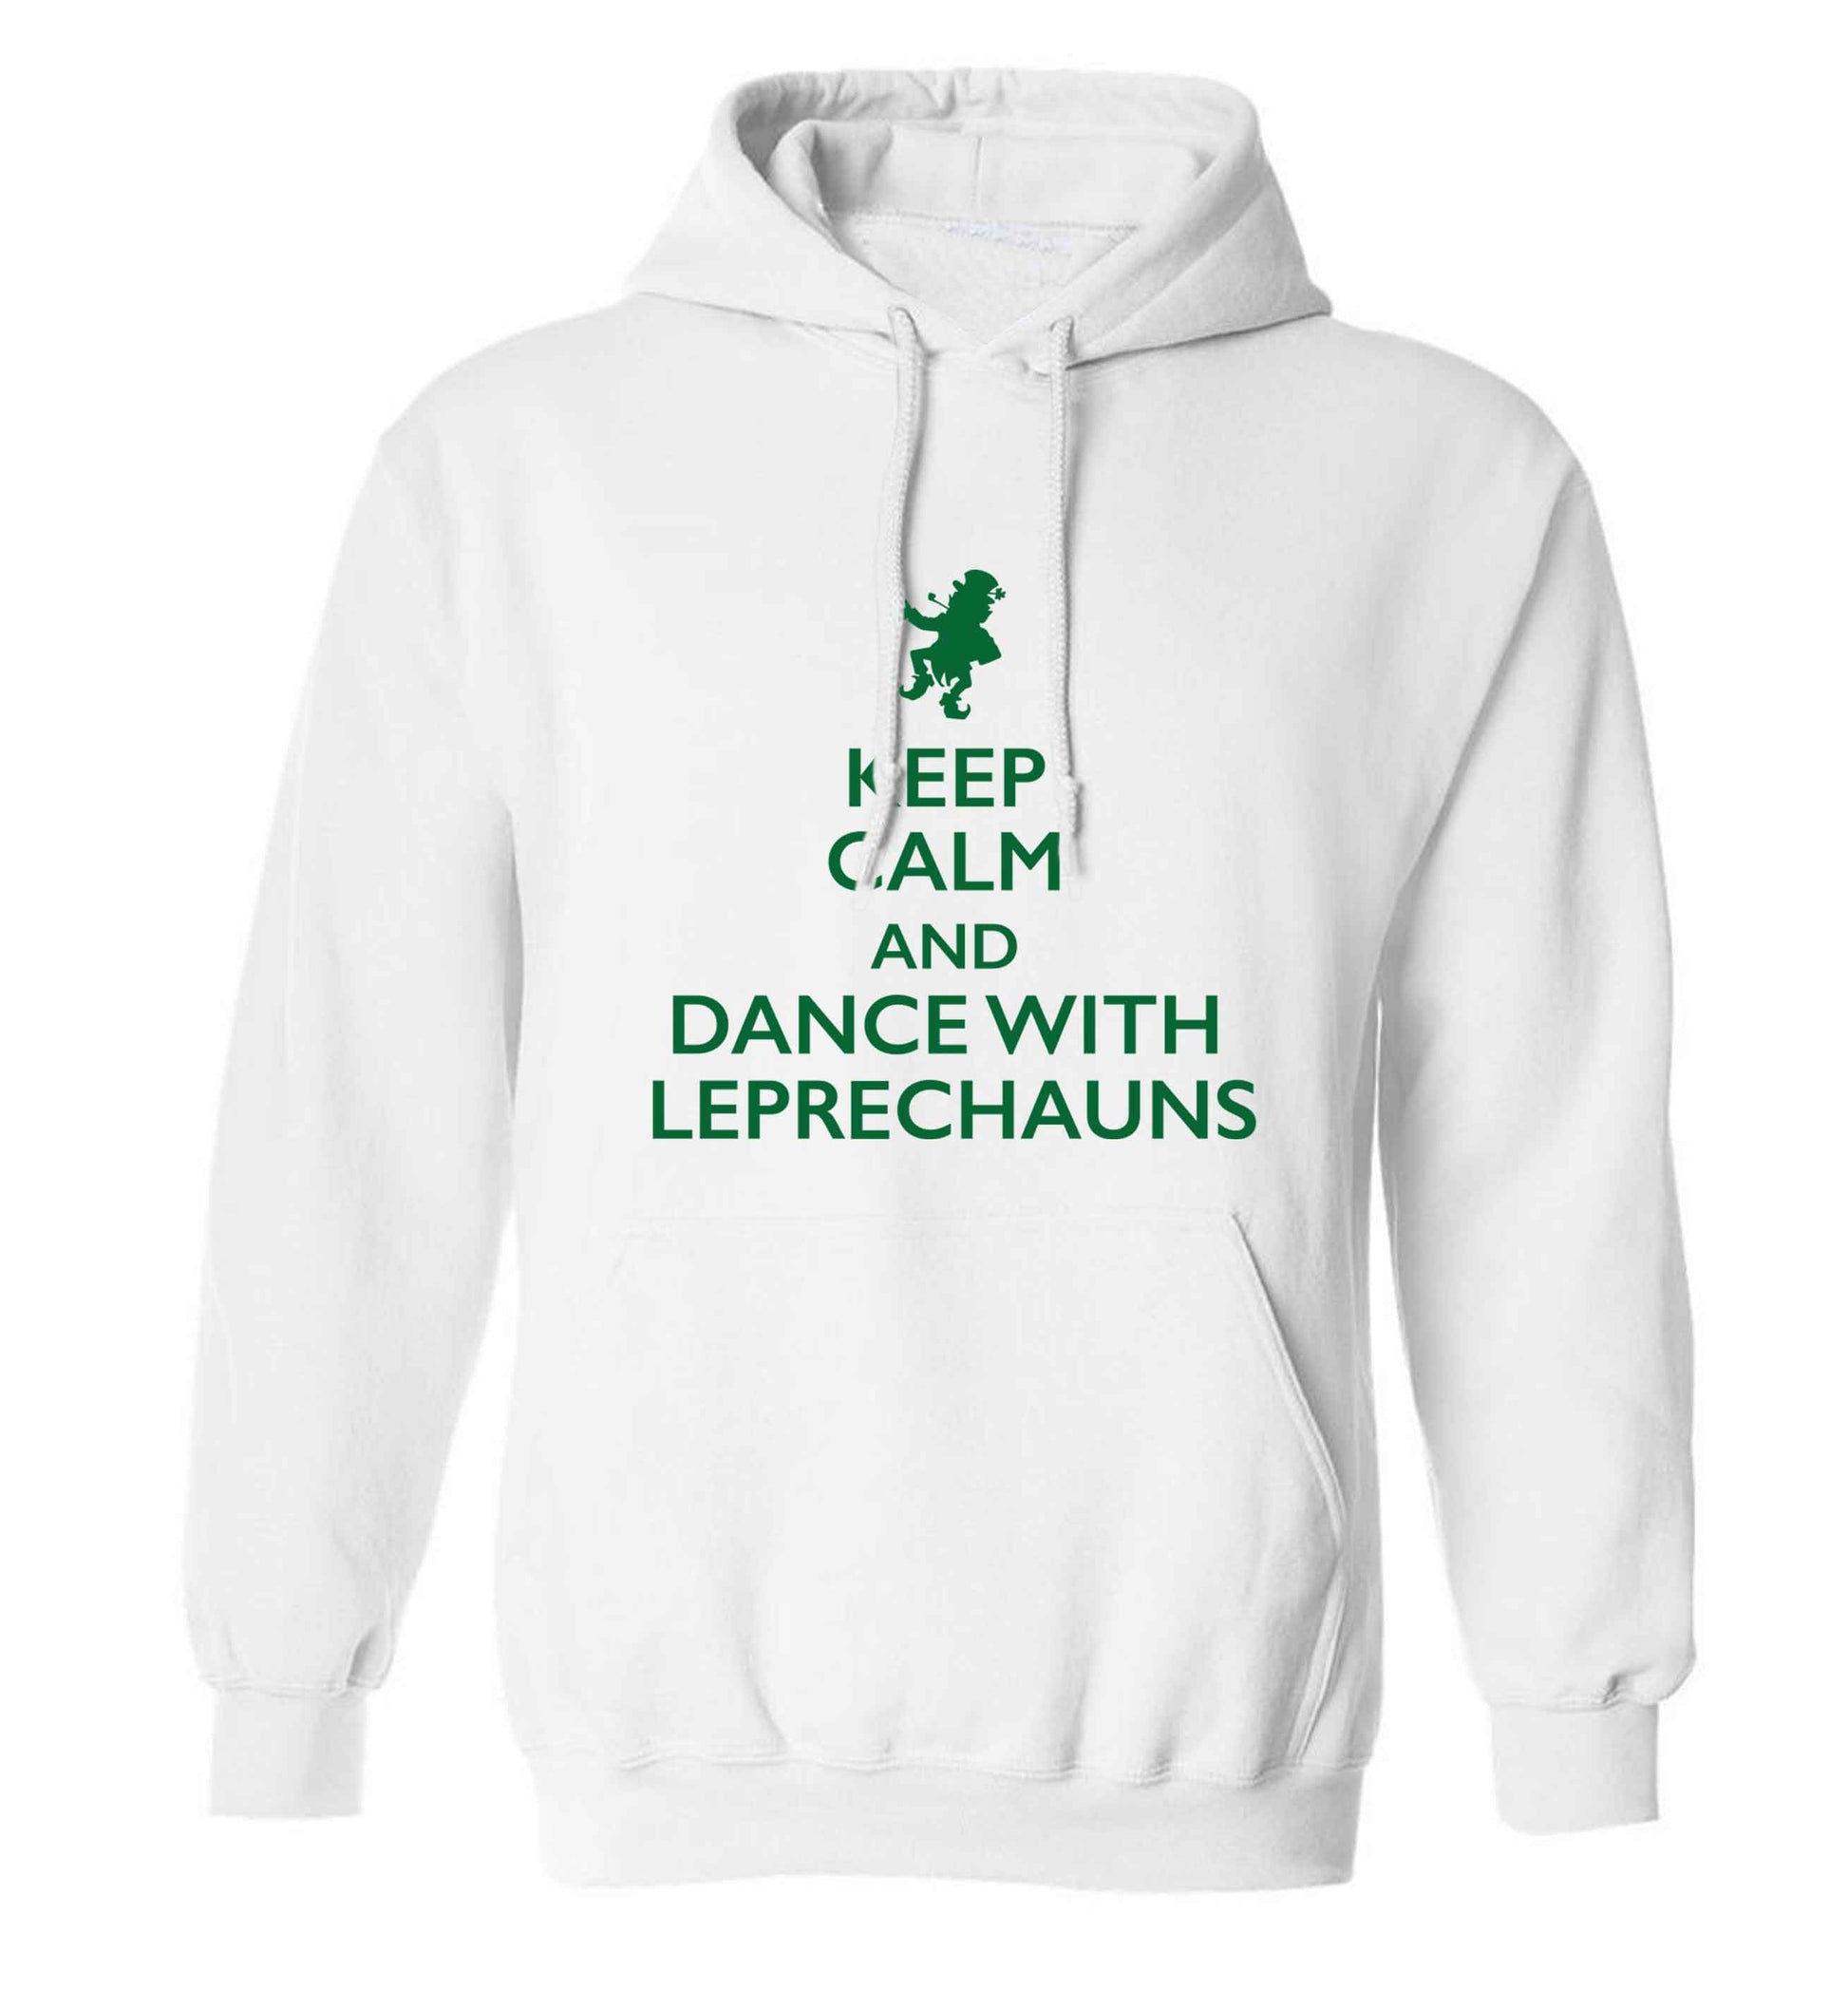 Keep calm and dance with leprechauns adults unisex white hoodie 2XL